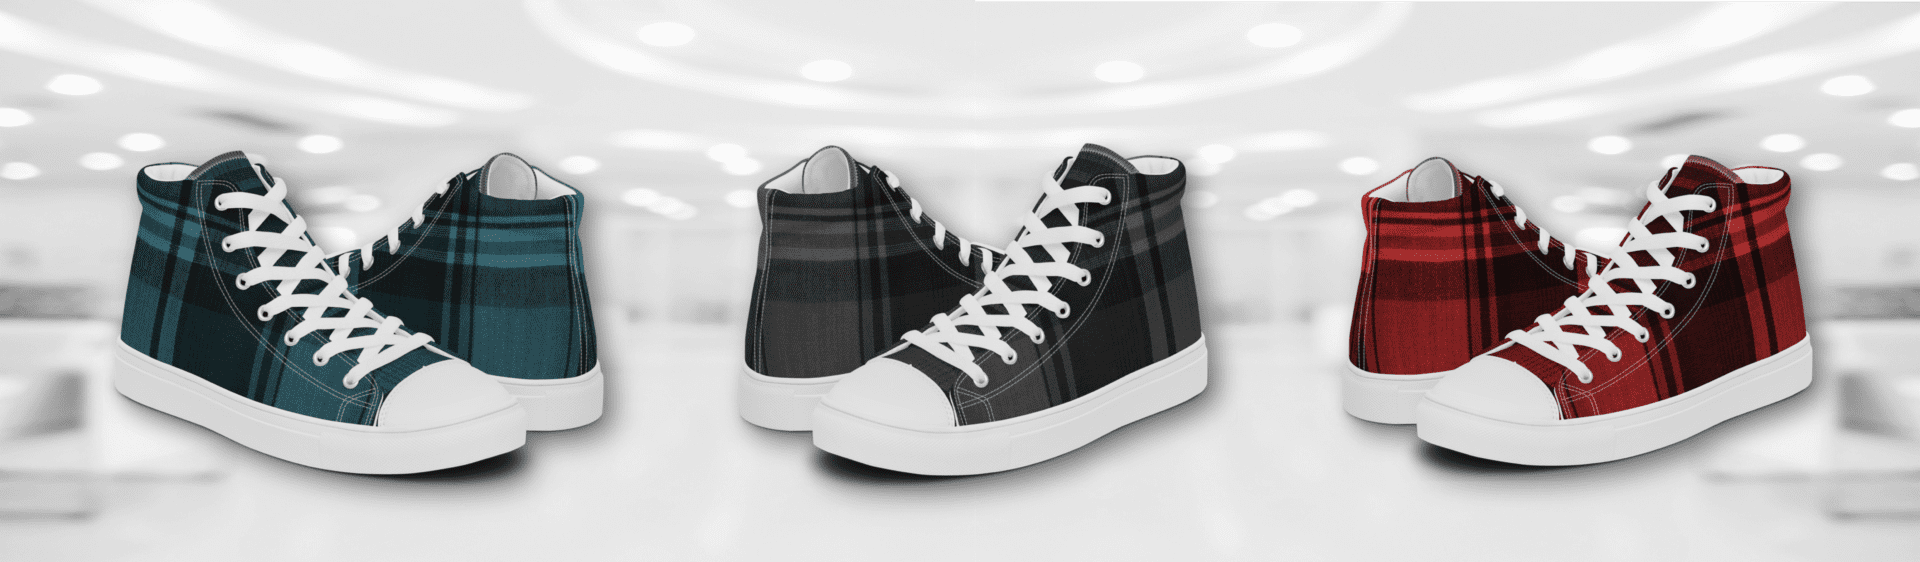 Three pairs of plaid high top sneakers.